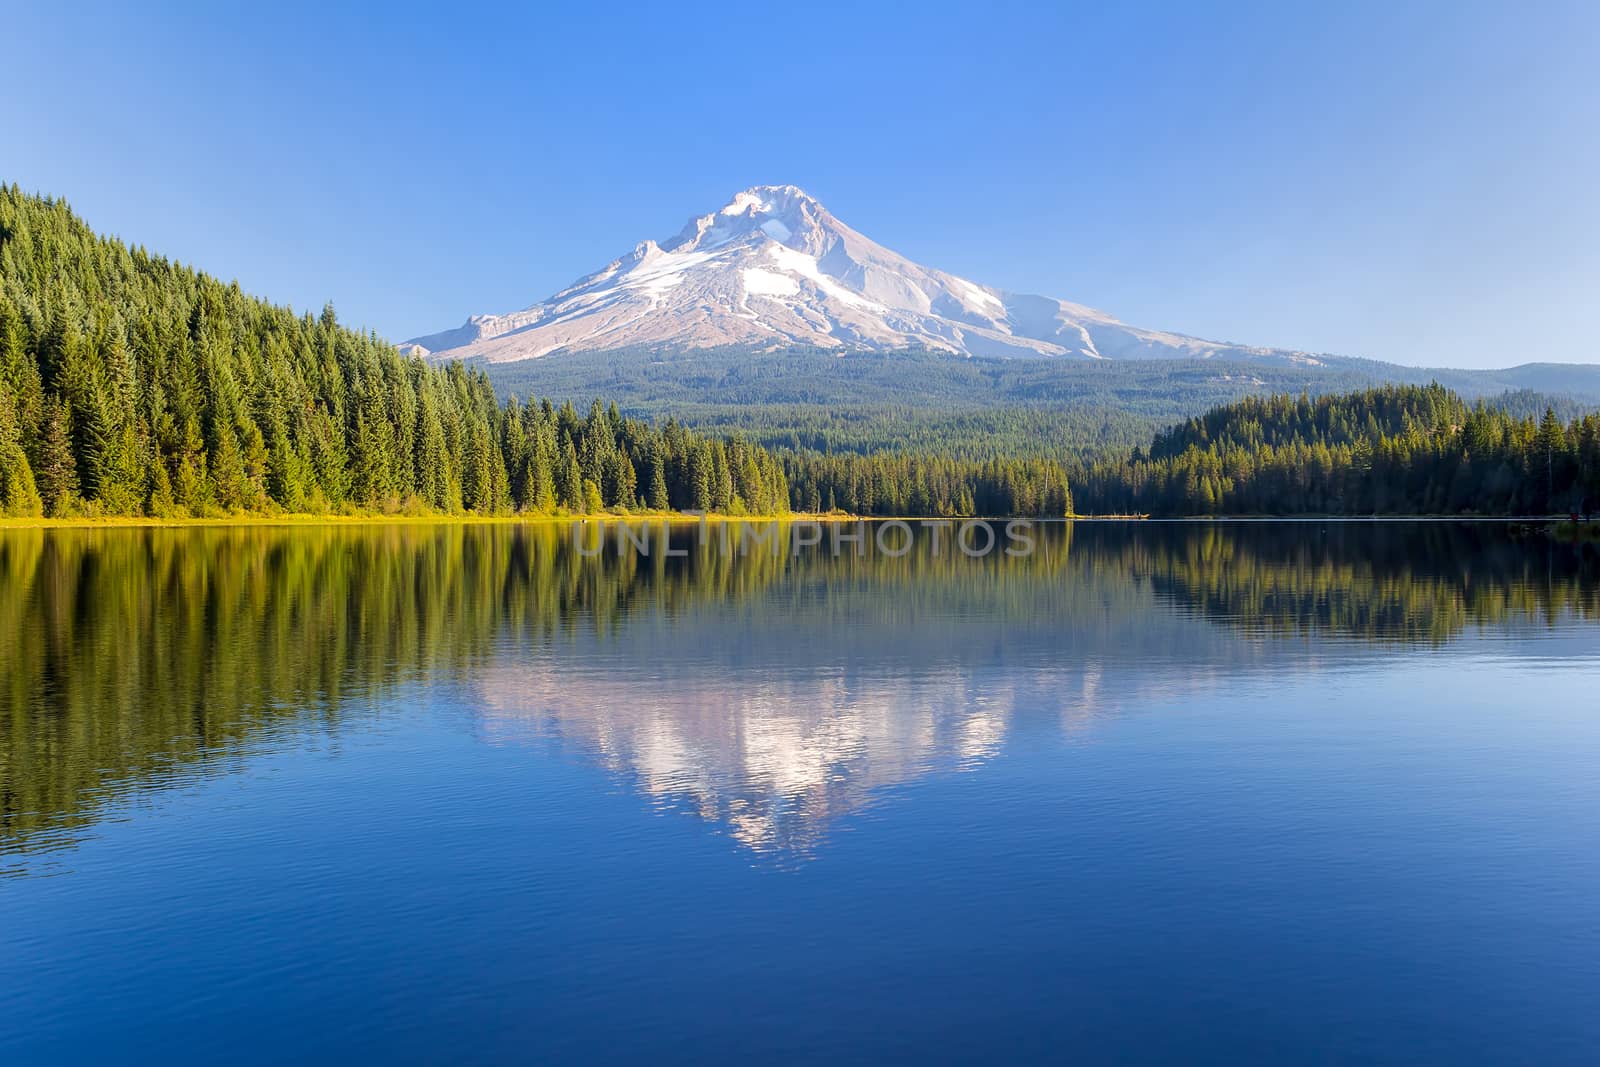 Mount Hood at Trillium Lake on a sunny blue sky day